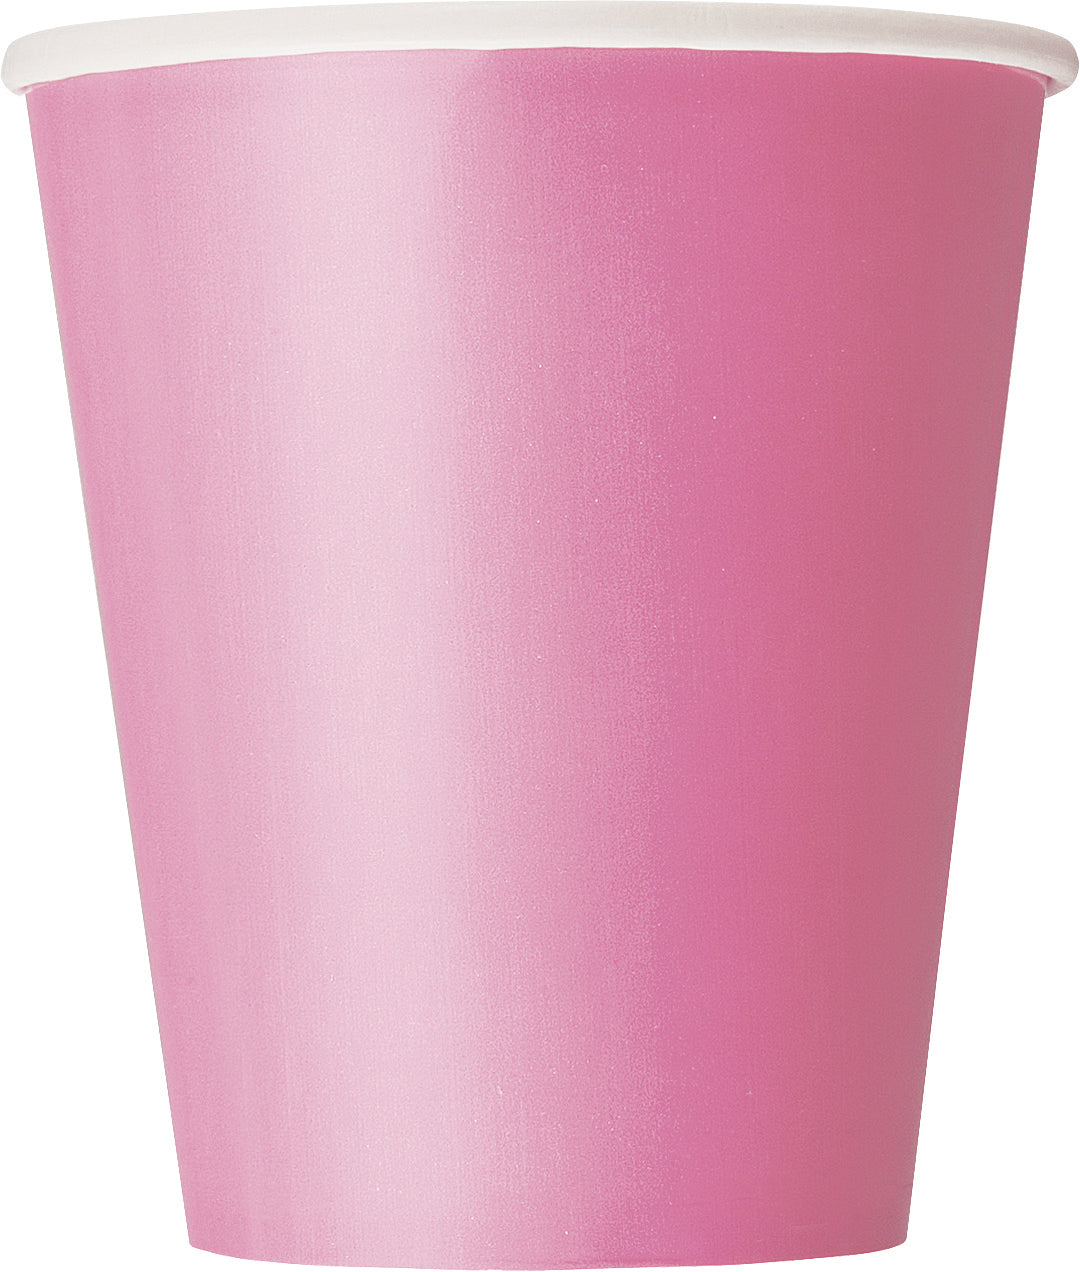 8 Pack Hot Pink Paper Cups - 270ml